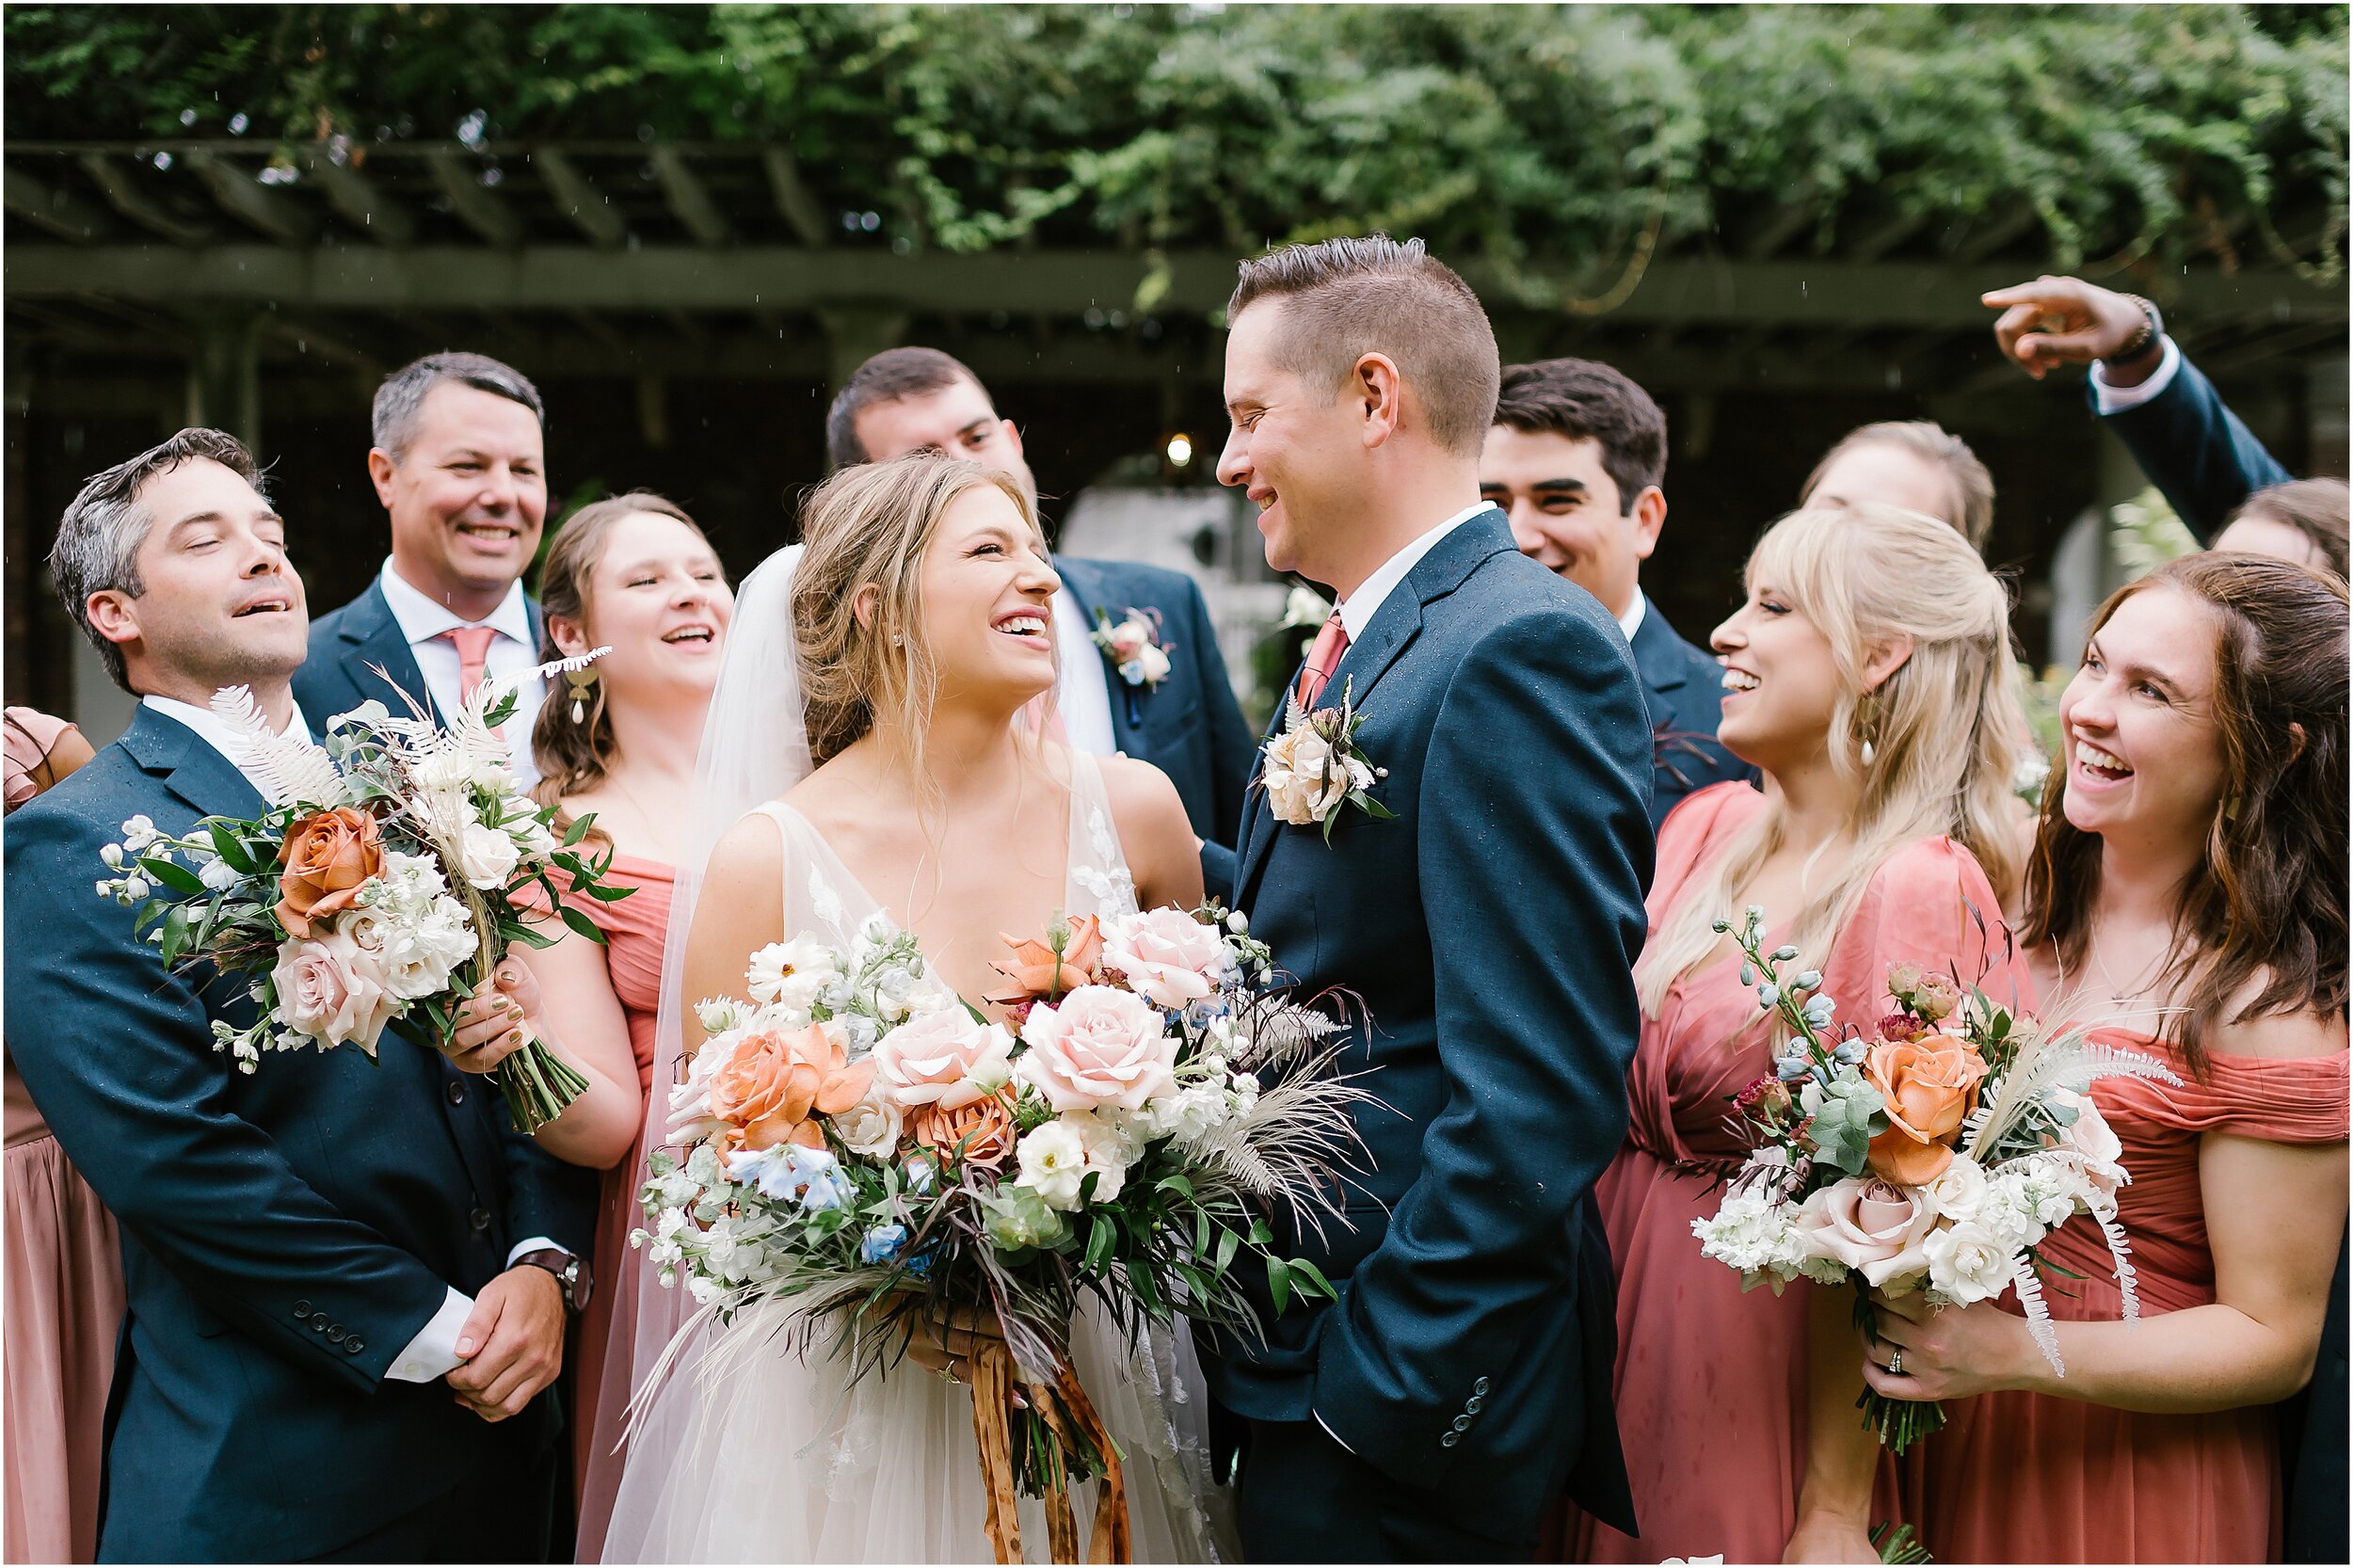 Rebecca Shehorn Photography Colleen and Kyle Inn at Irwin Gardens Wedding-658_The Commons Columbus Inn at Irwin Garden Indianapolis Wedding Photographer.jpg